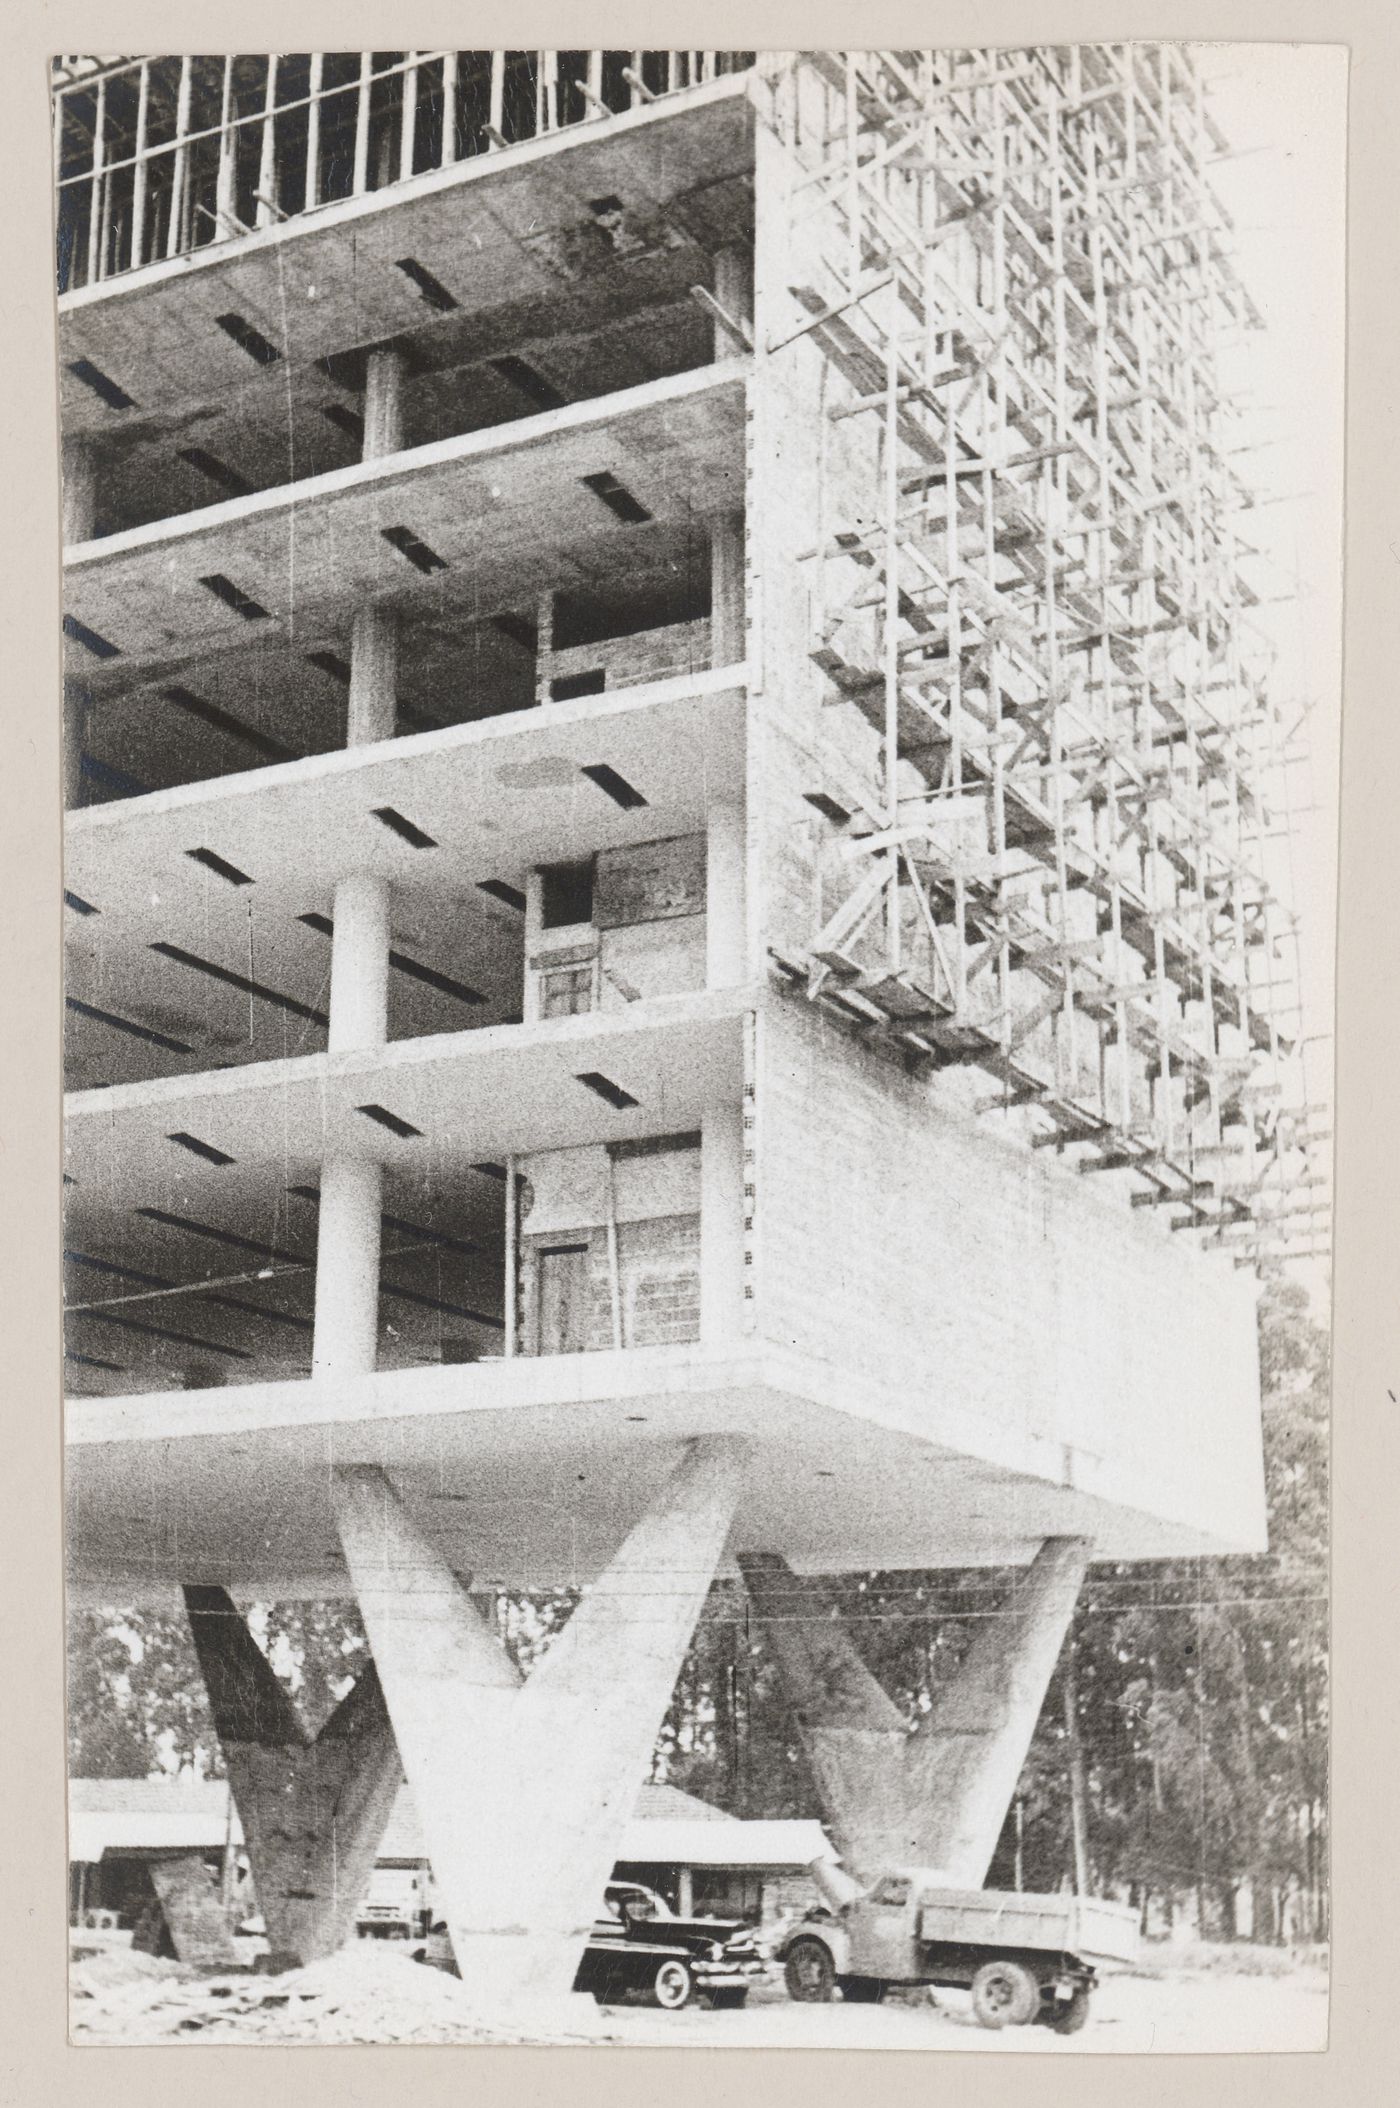 View of Palace of Agriculture, under construction, São Paulo, Brazil
